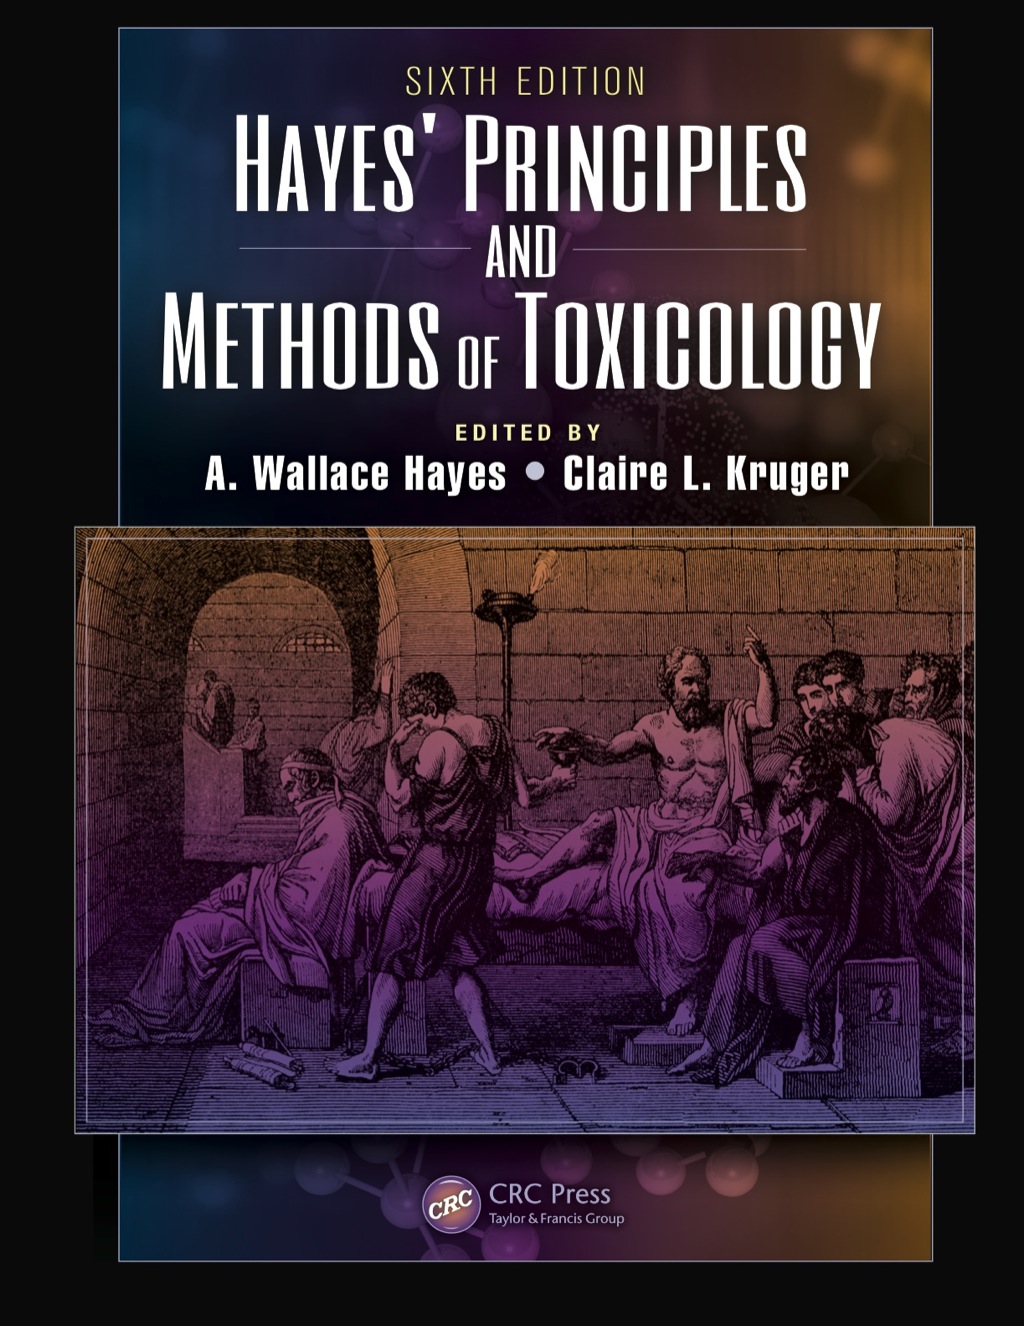 Hayes' Principles and Methods of Toxicology - 6th Edition (eBook)